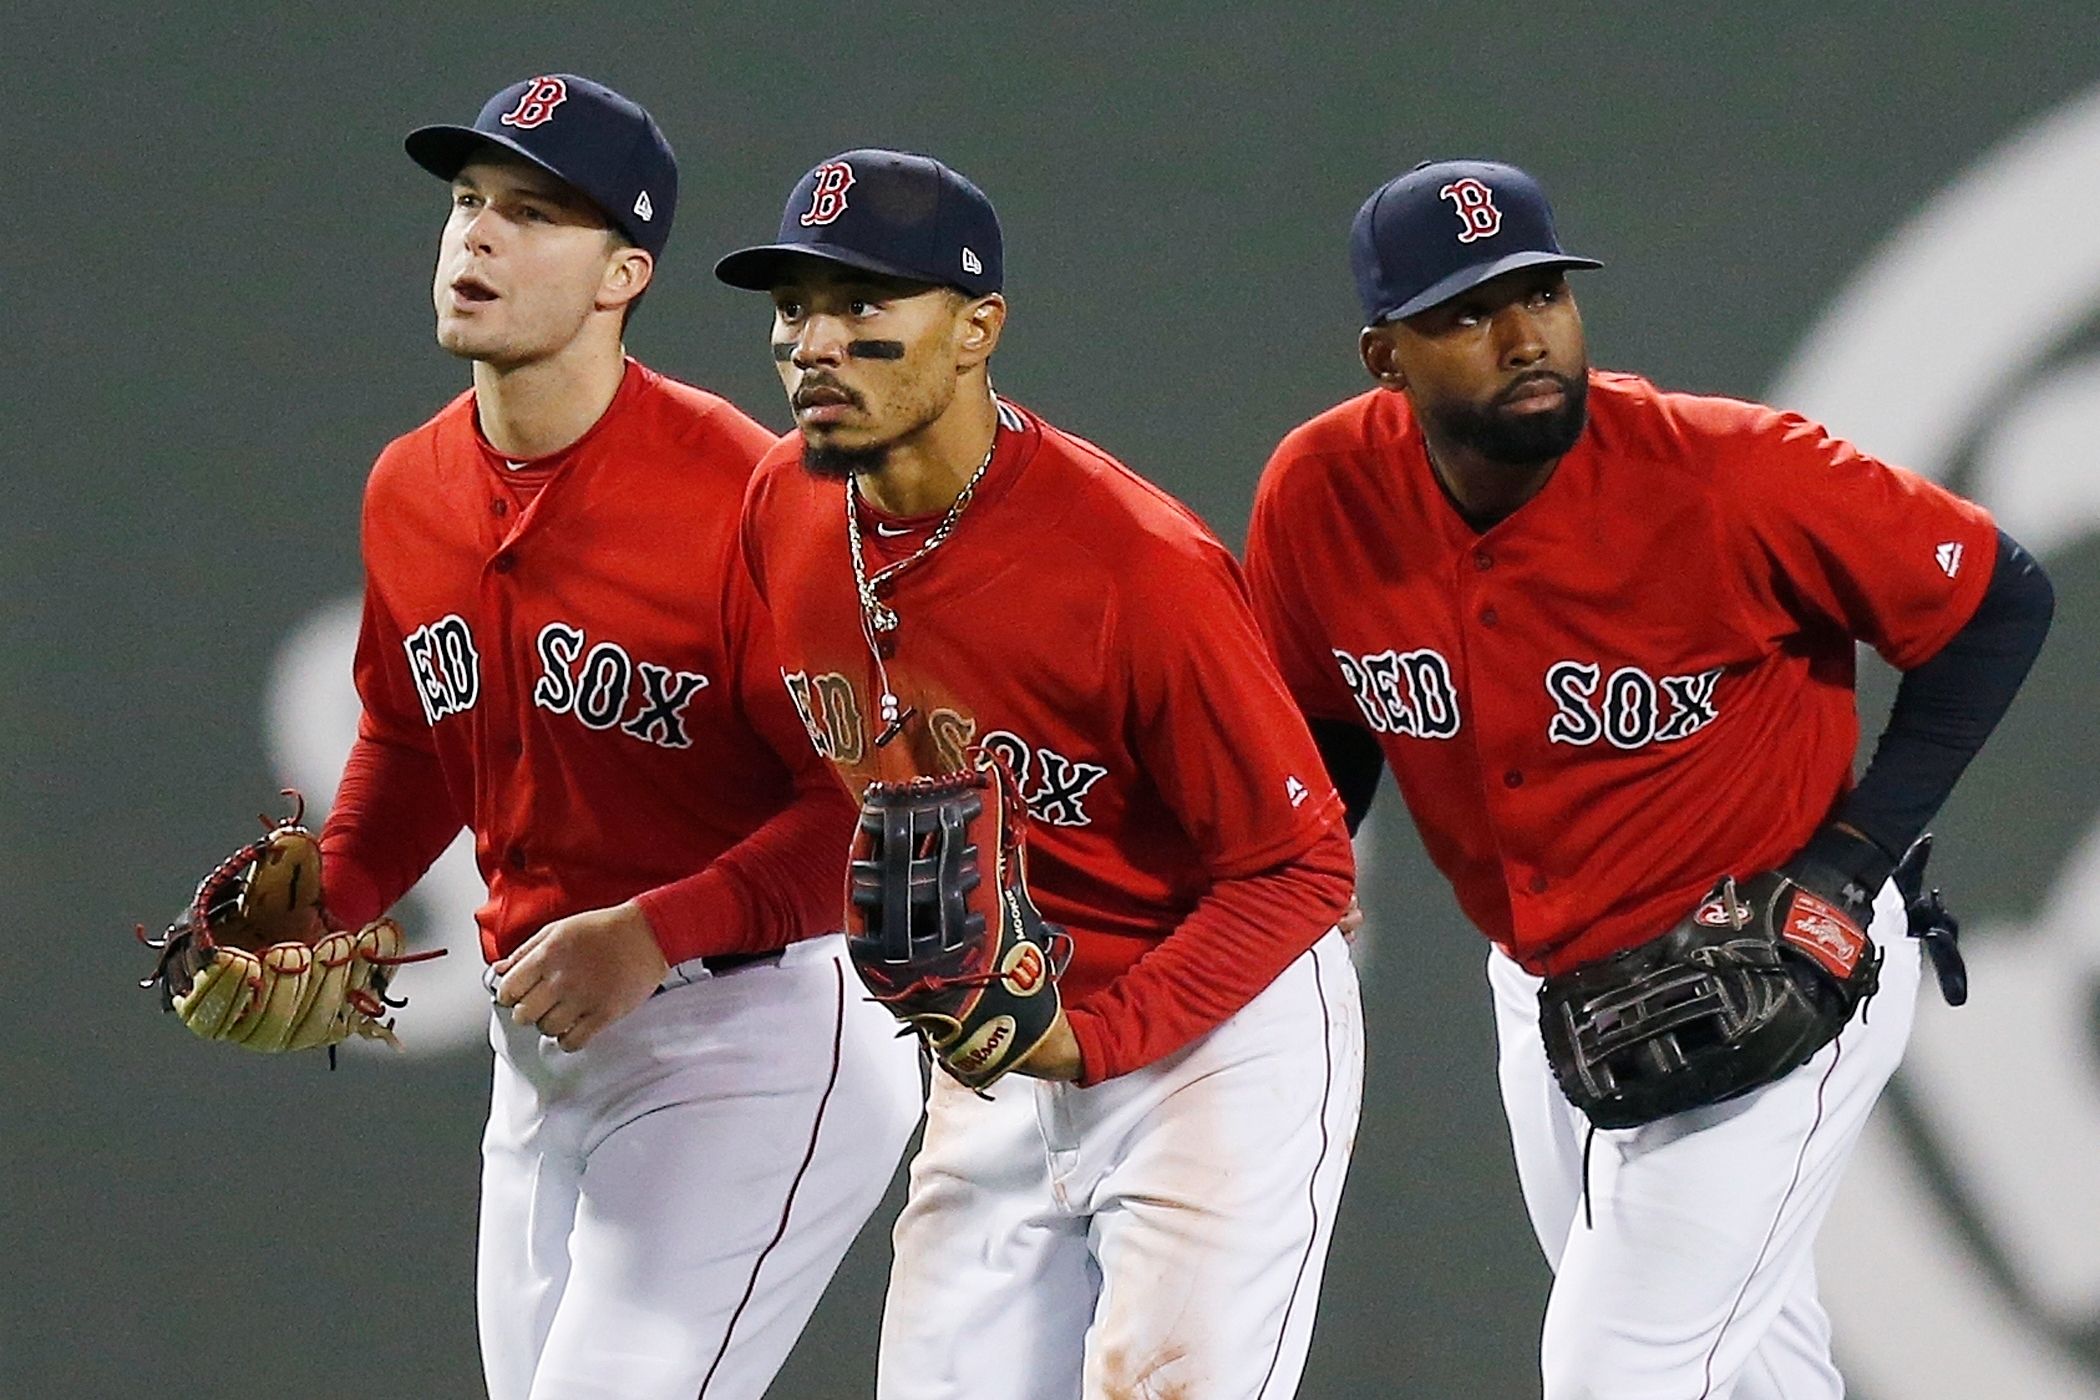 With Betts gone, Red Sox fill holes in OF and at leadoff The Seattle Times